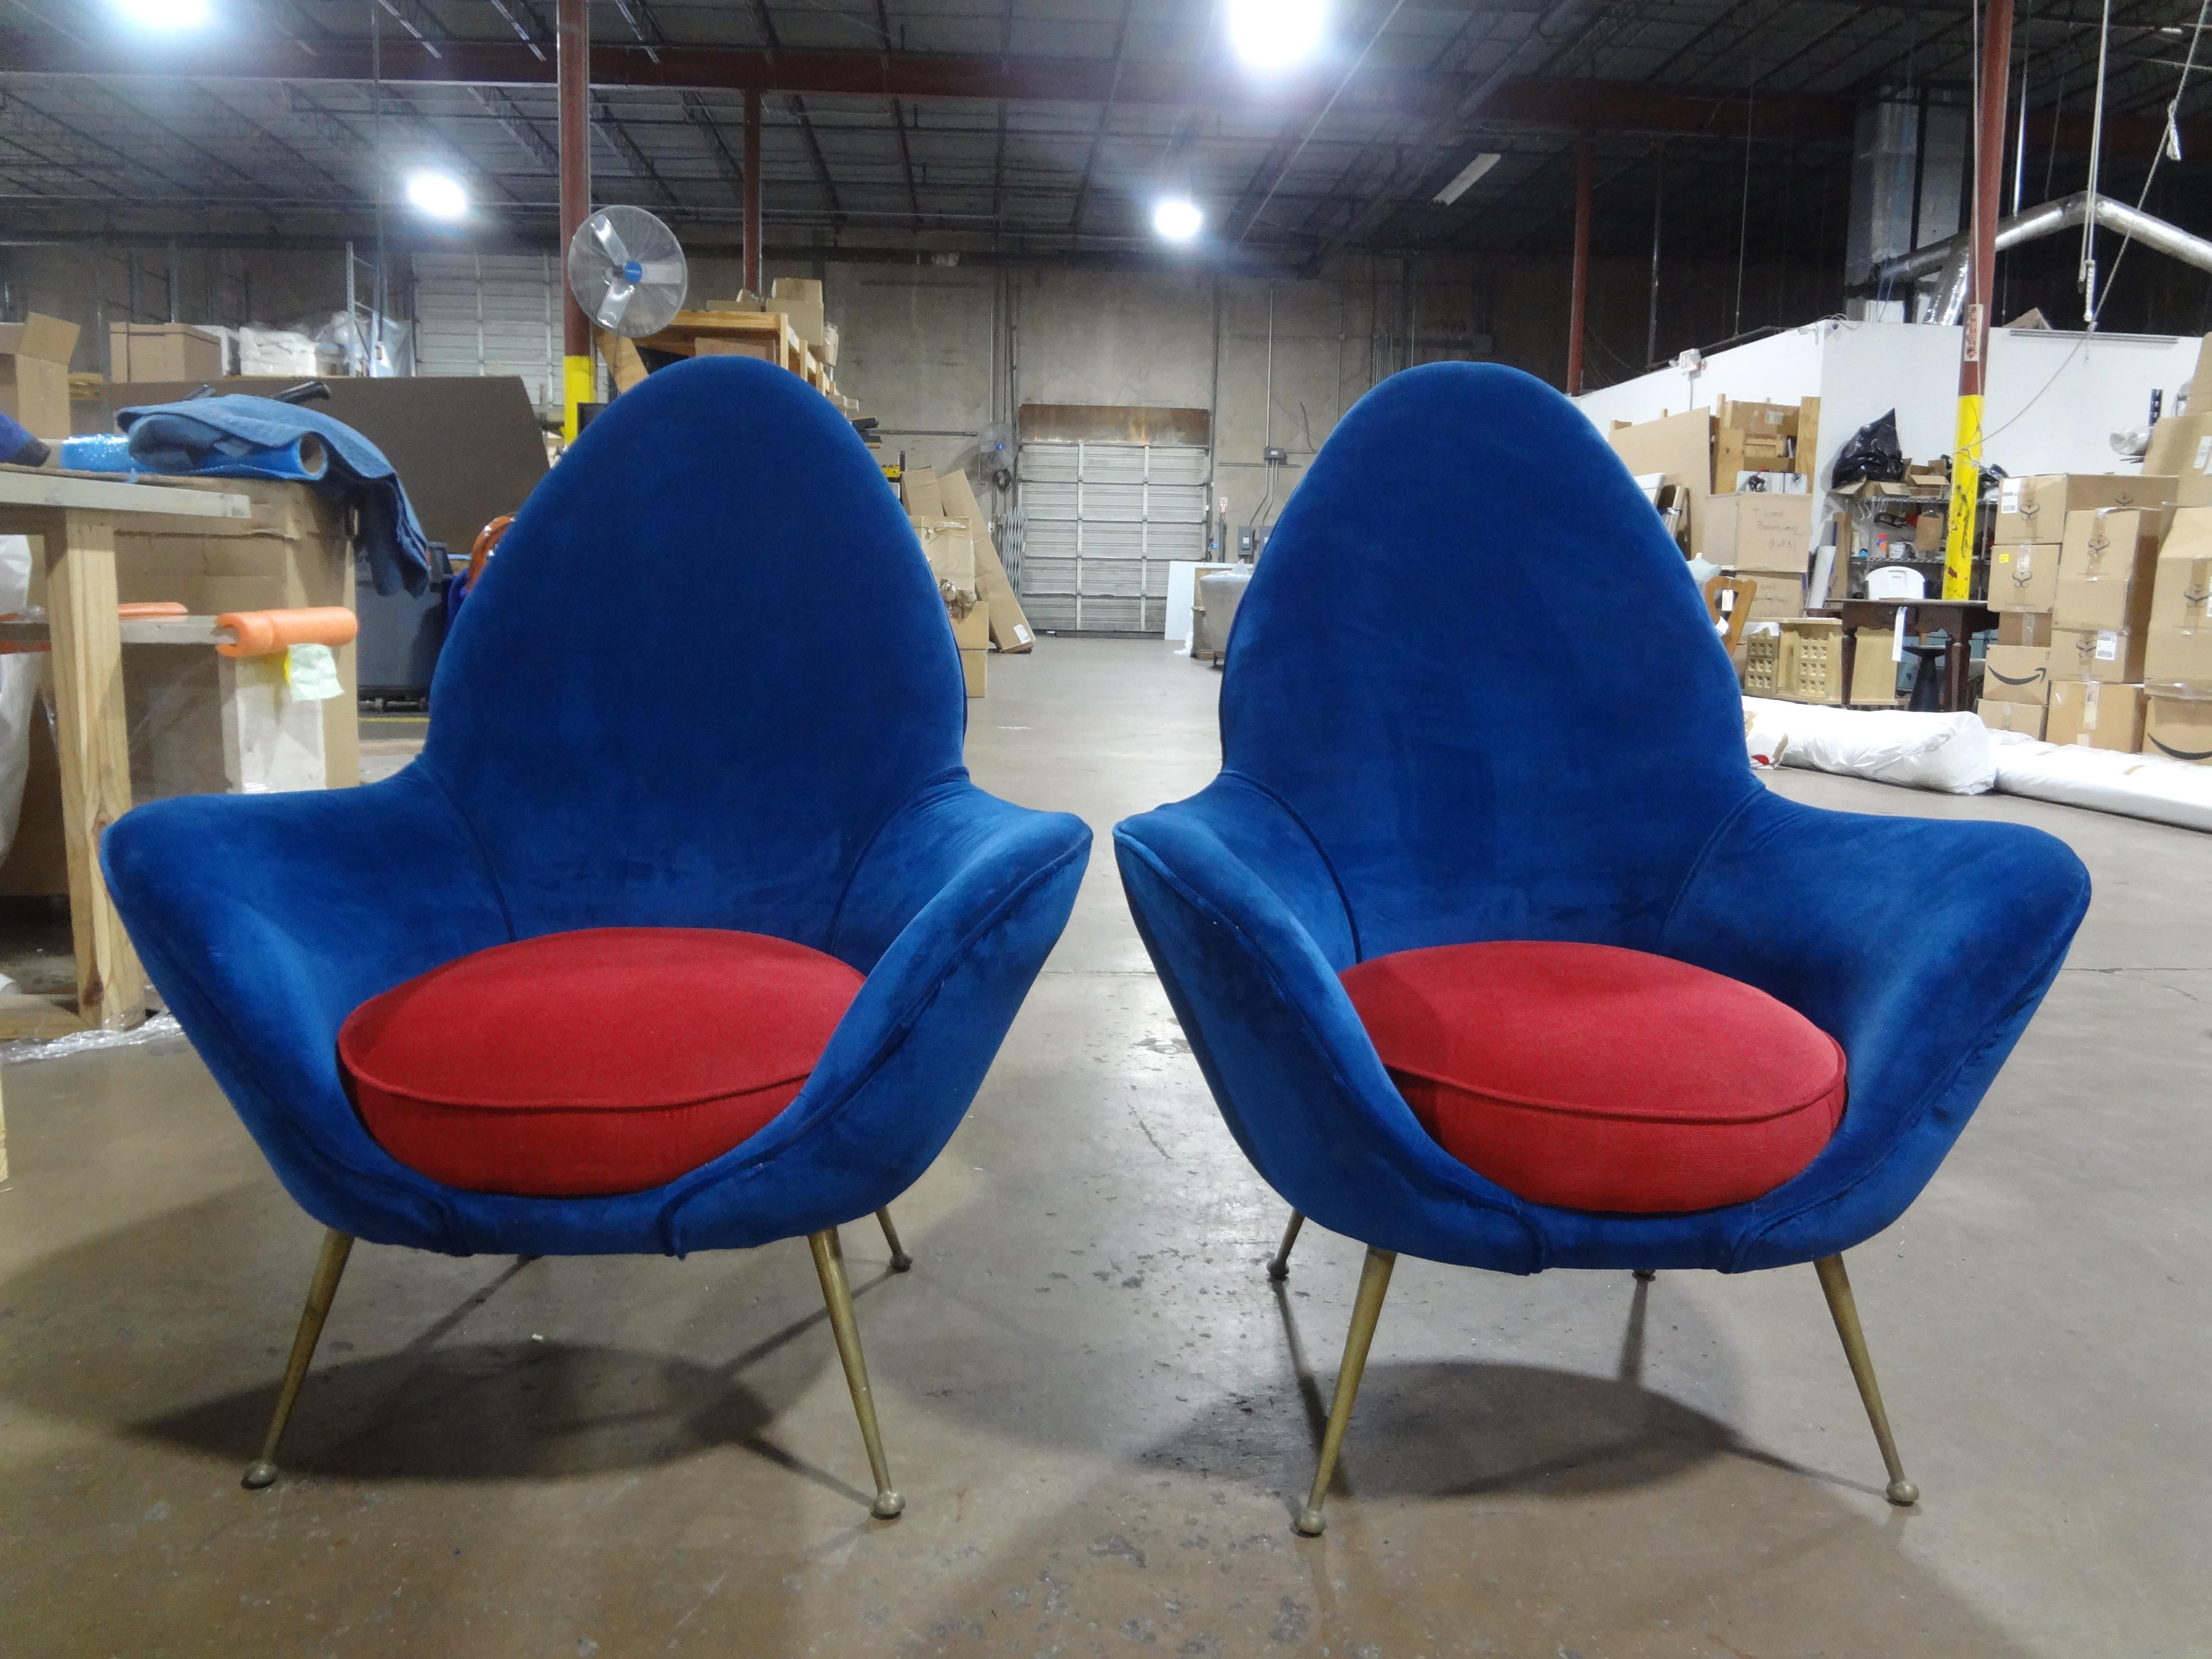 Pair Of Italian Modern Lounge Chairs By Marco Zanuso.
These shapely Italian Gio Ponti inspired mid century modern chairs with splayed brass legs are recently upholstered and very comfortable.
Beautiful from every angle. Perfect for floating in a